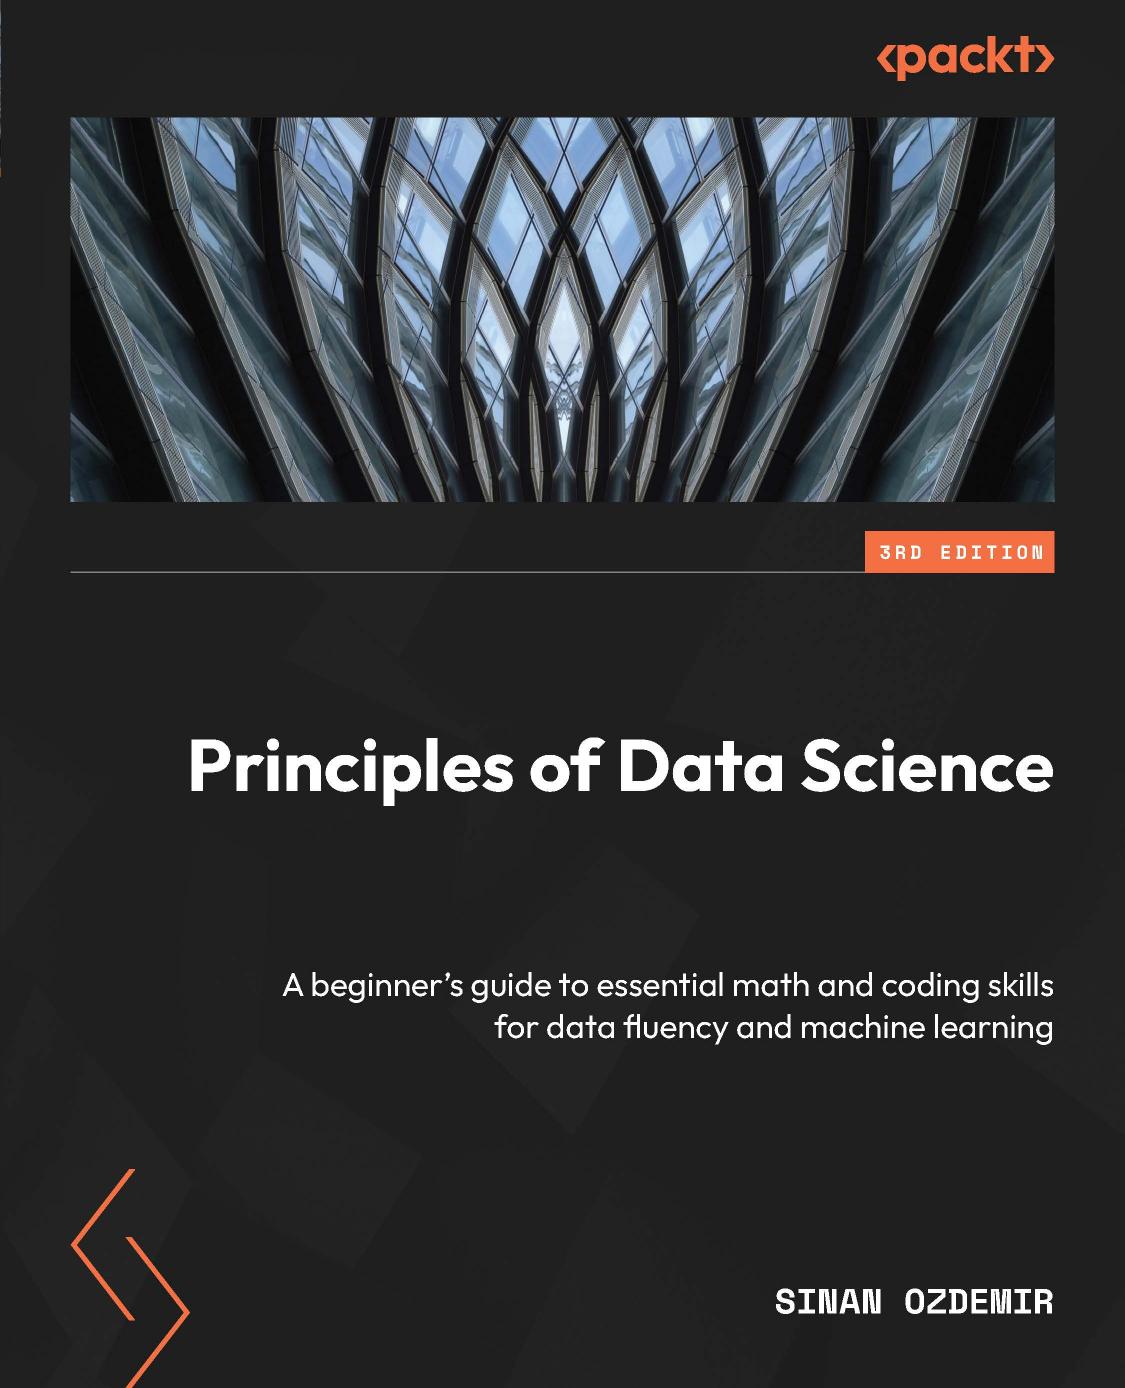 Principles of Data Science - Third Edition: A Beginner's Guide to Essential Math and Coding Skills for Data Fluency and Machine Learning